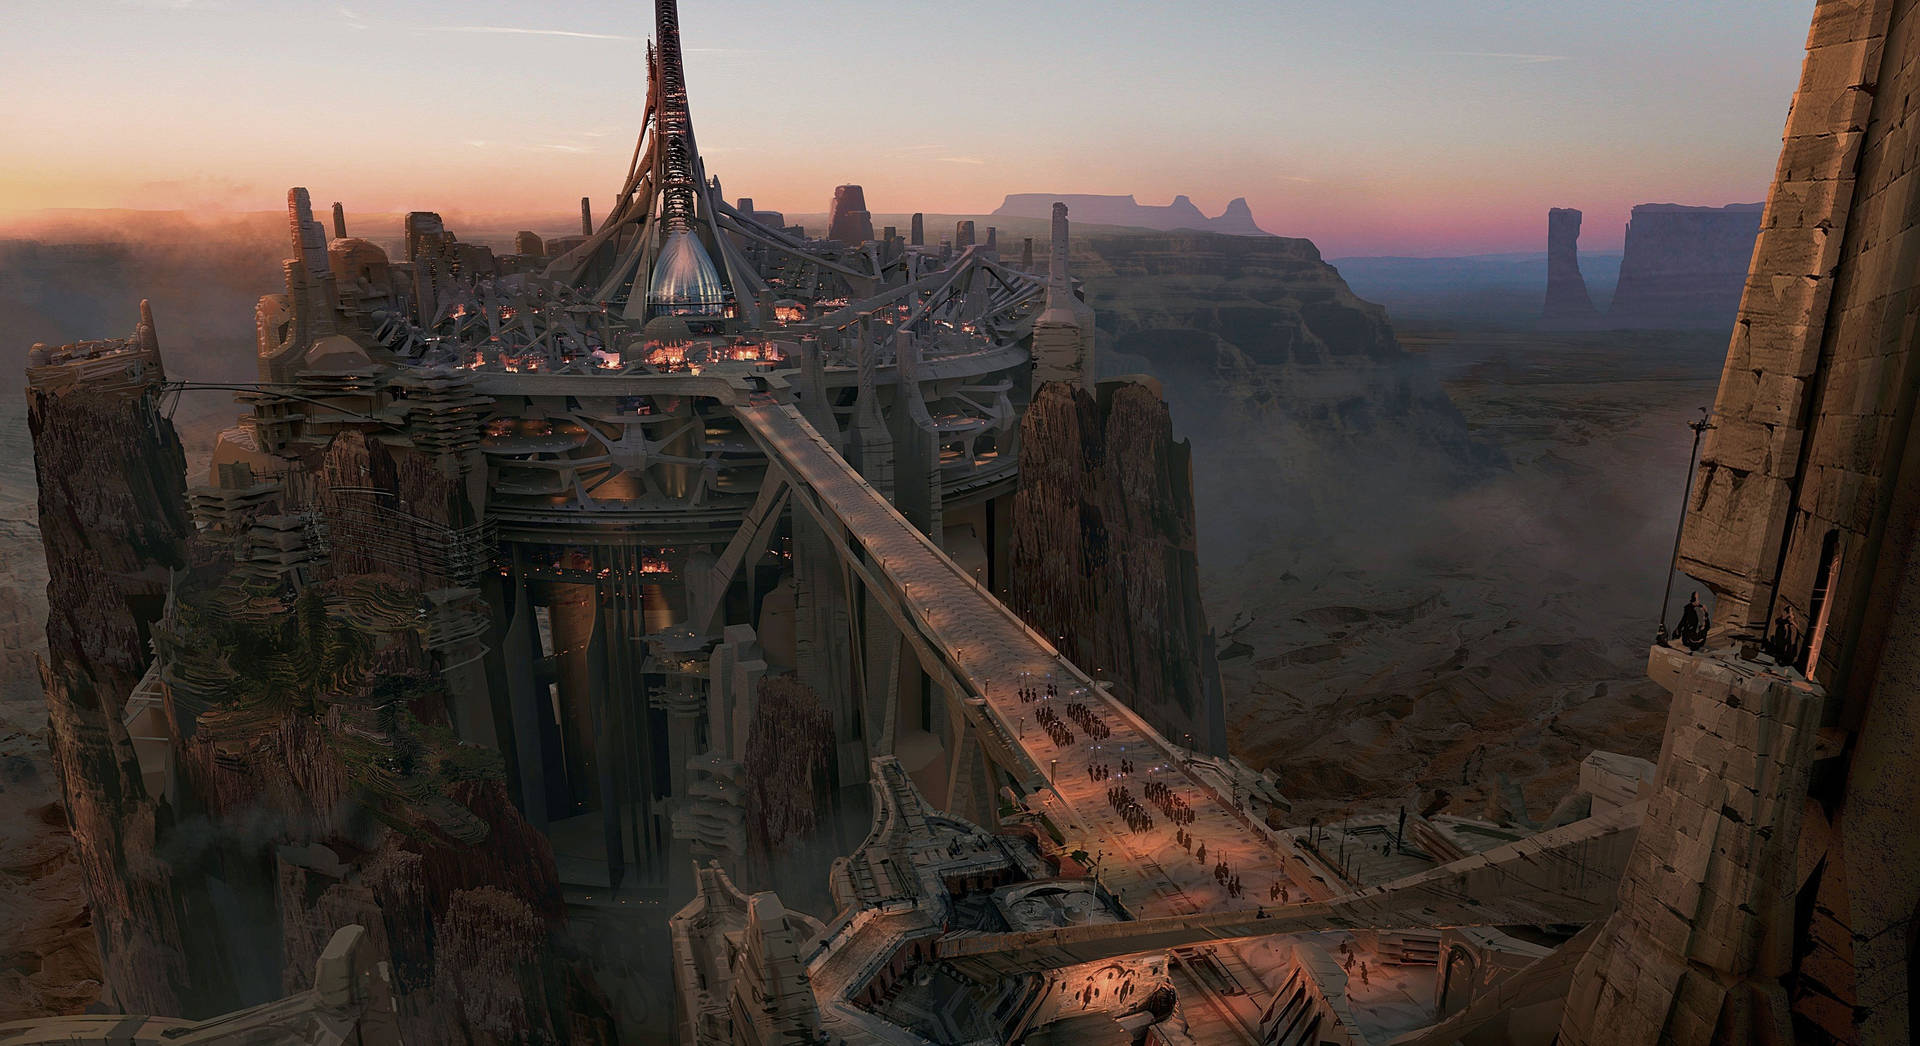 Helium High Tower In John Carter Background